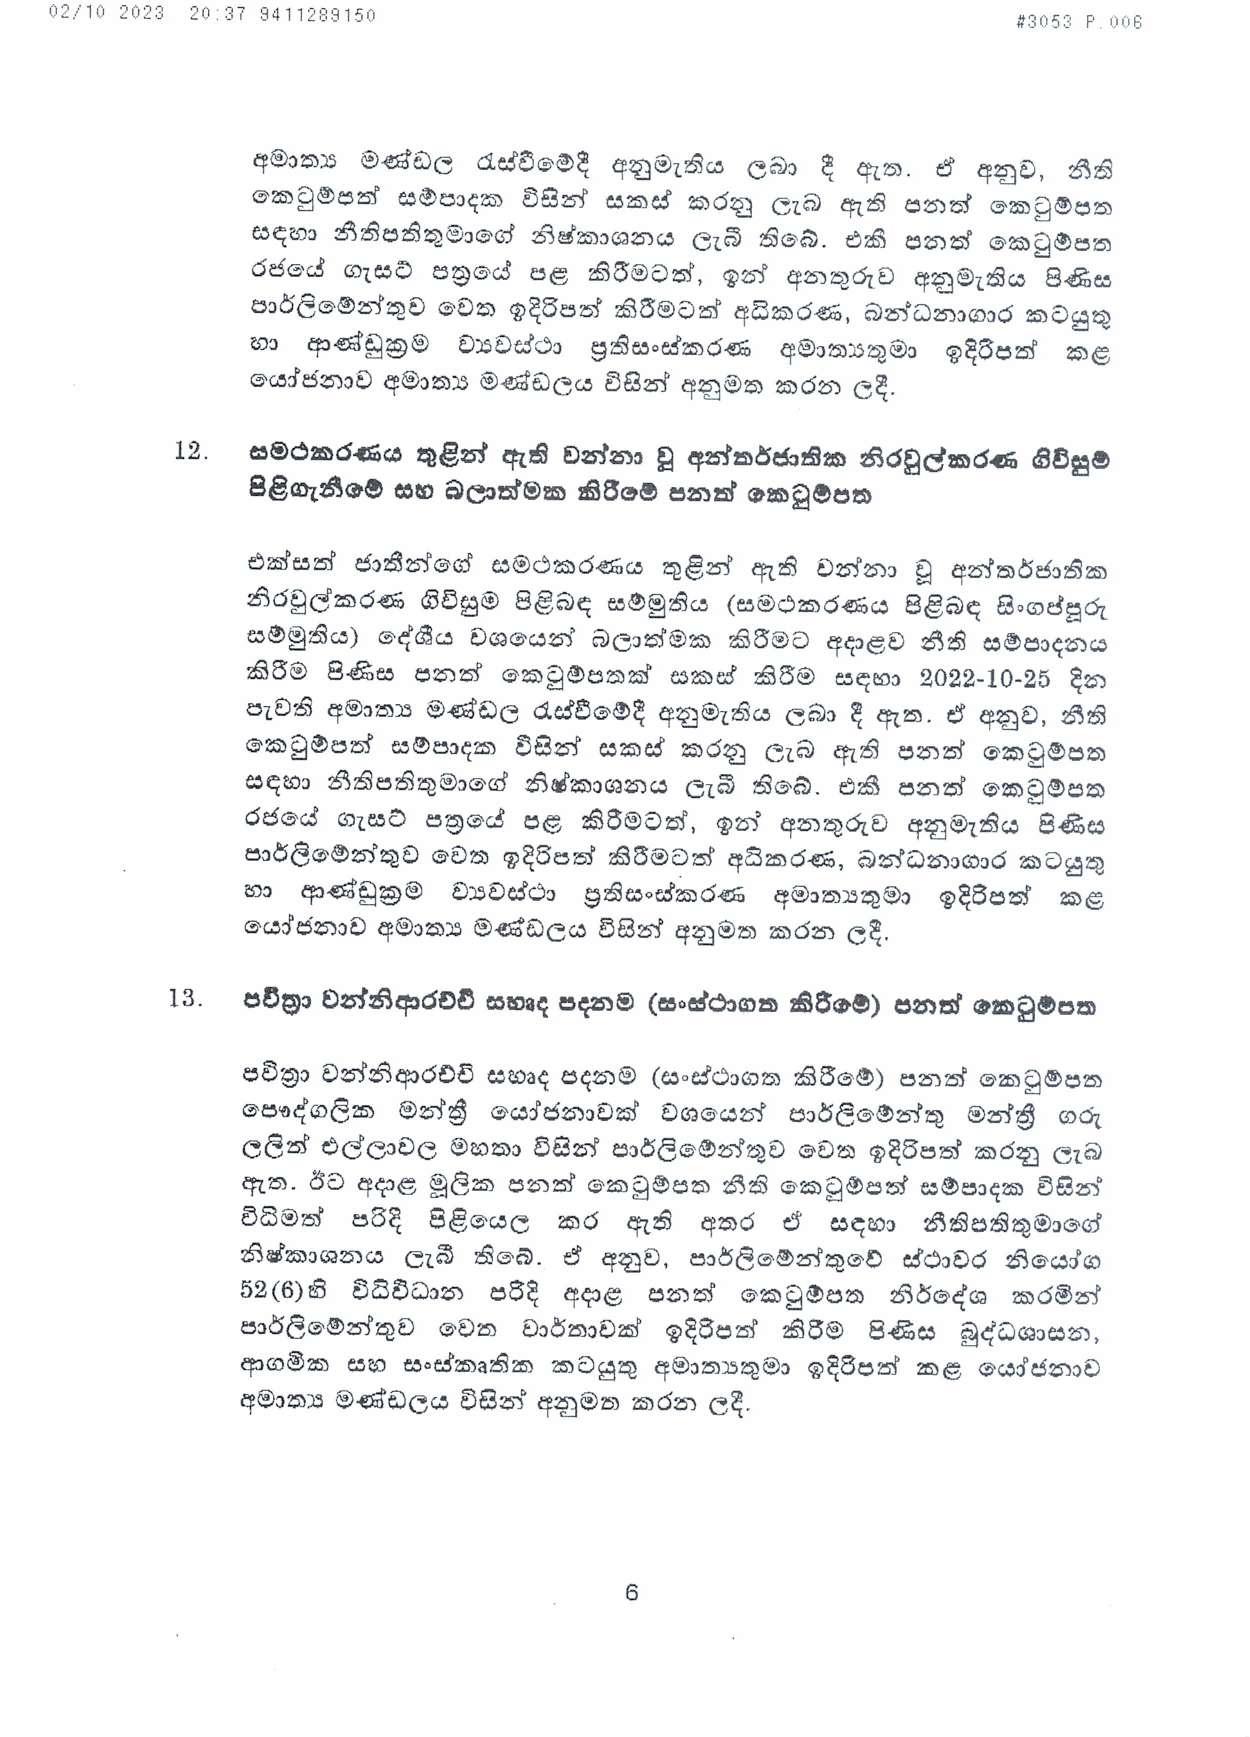 Cabinet Decision on 02.10.2023 1 page 006